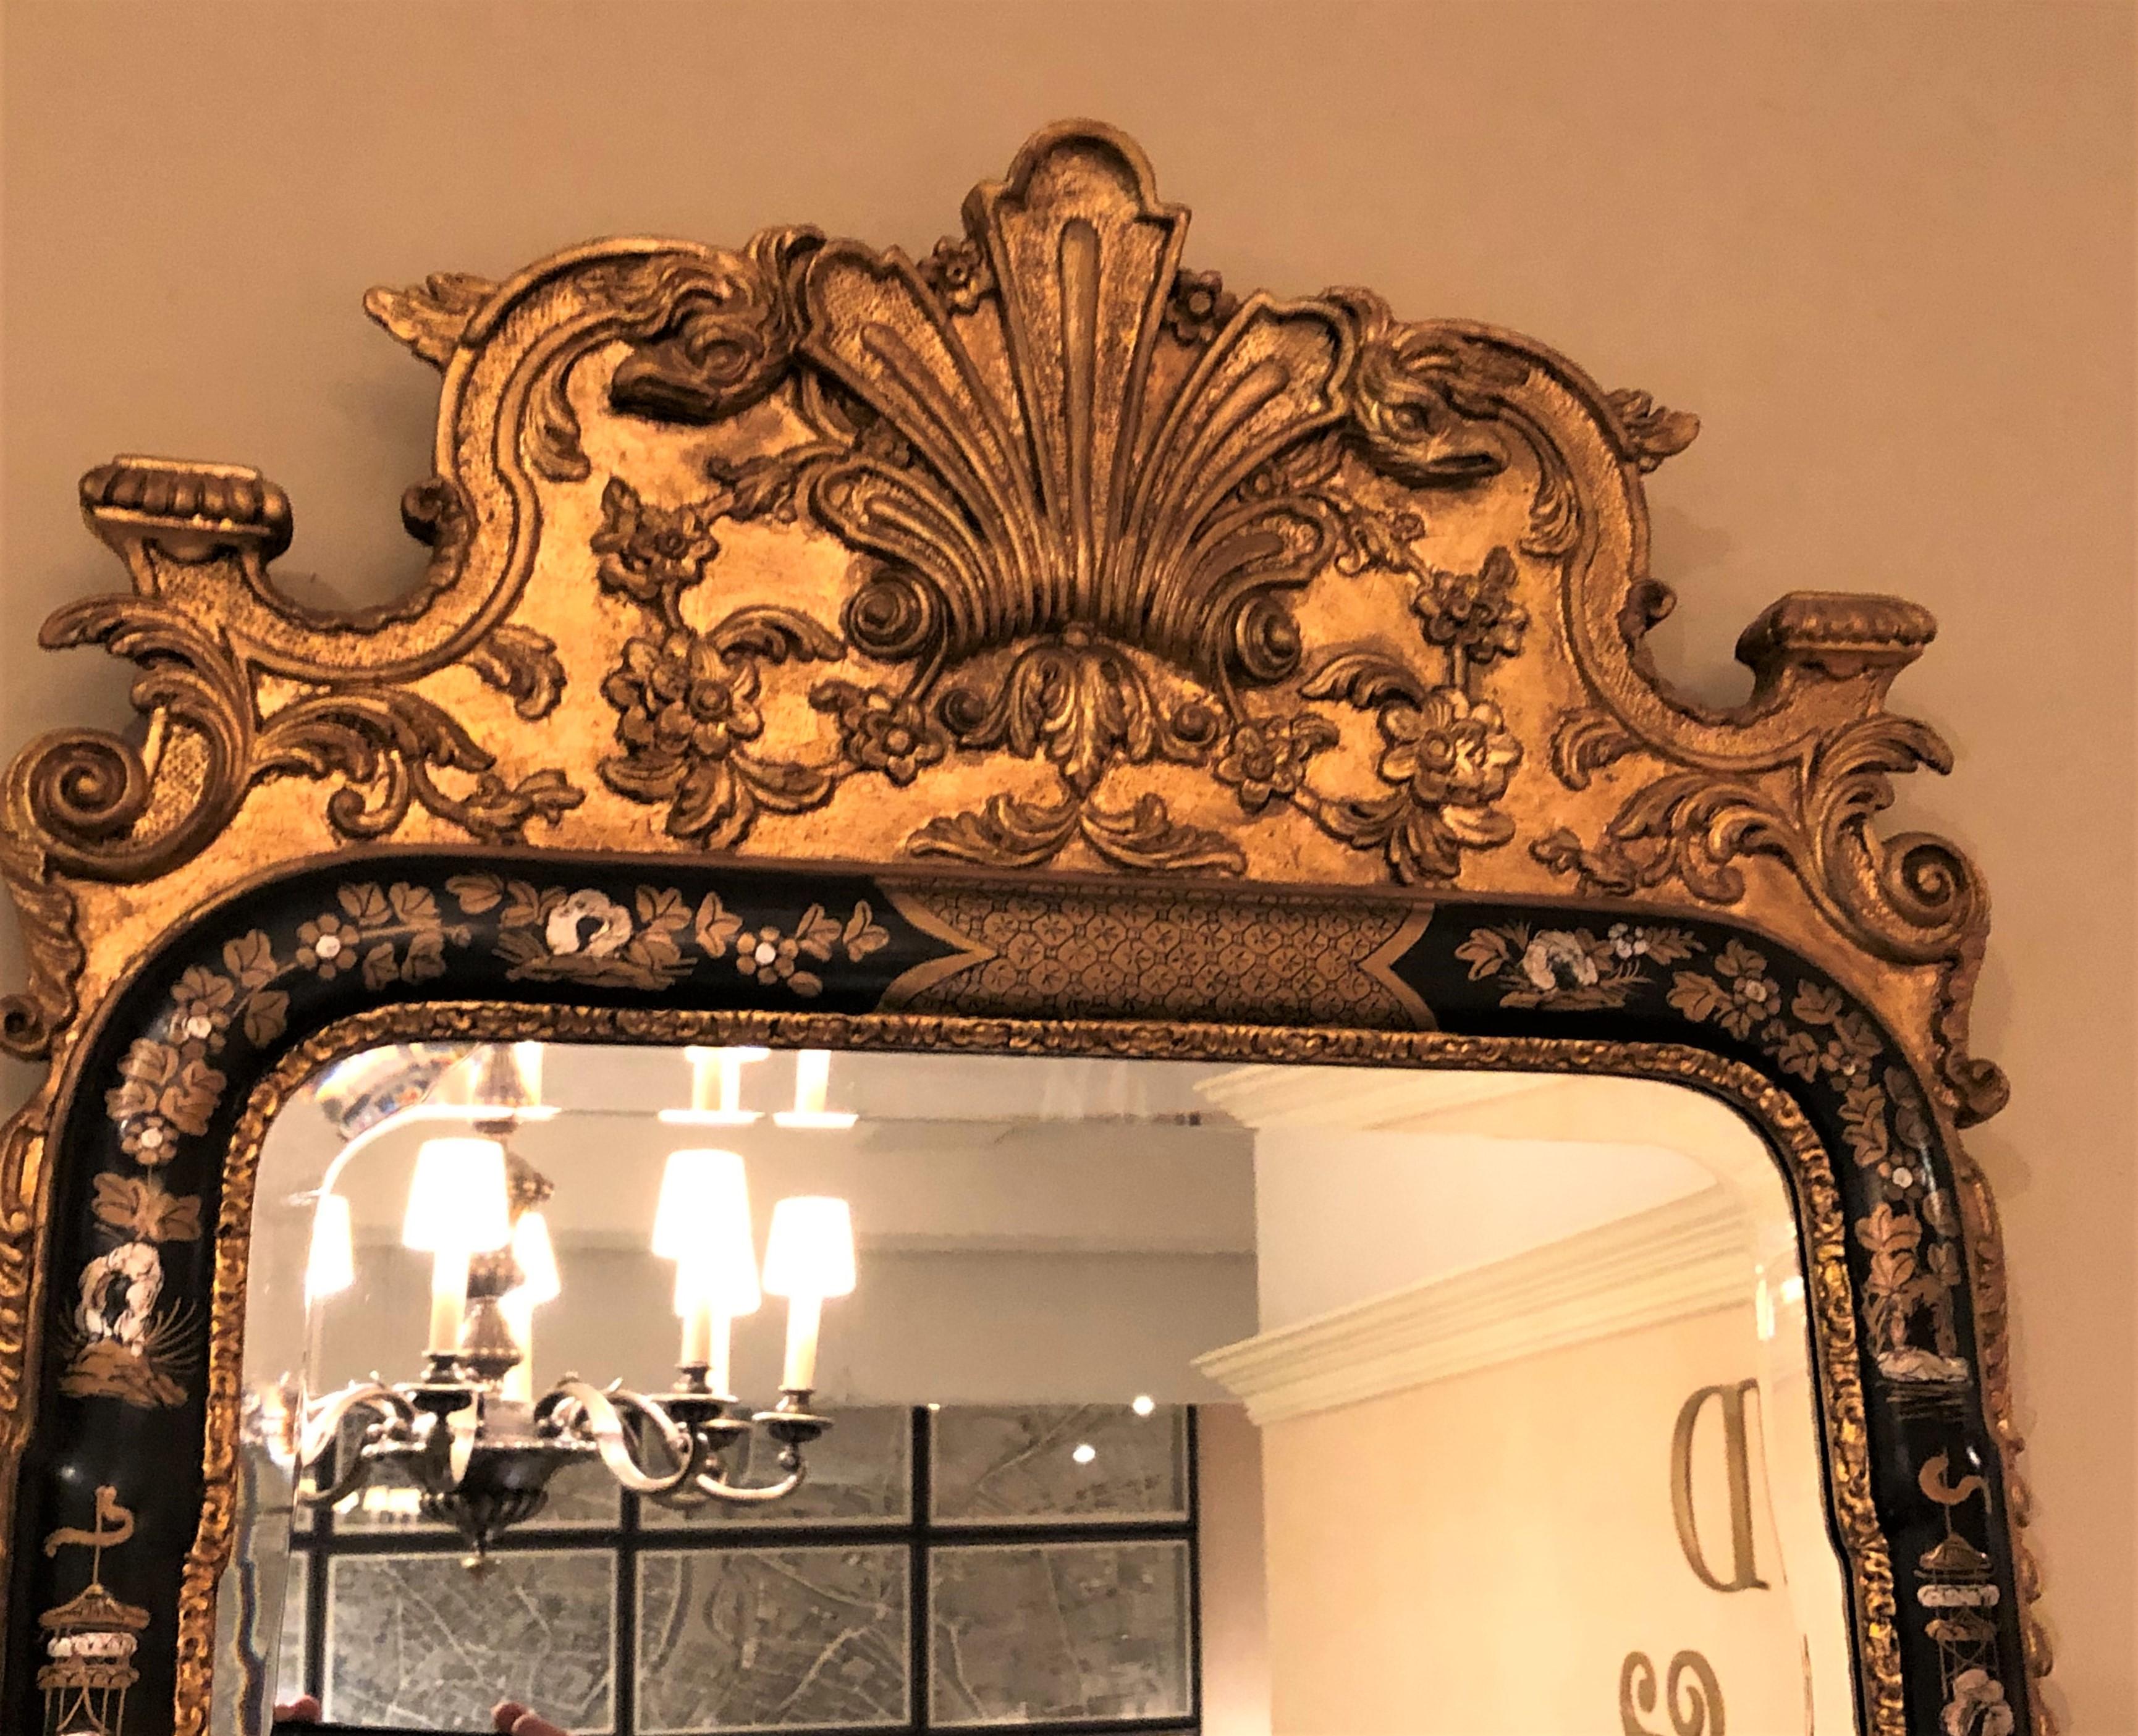 Hand-Painted Black Lacquered Queen Anne Style Mirror w/ Chinoiserie Decoration & Bevel Glass